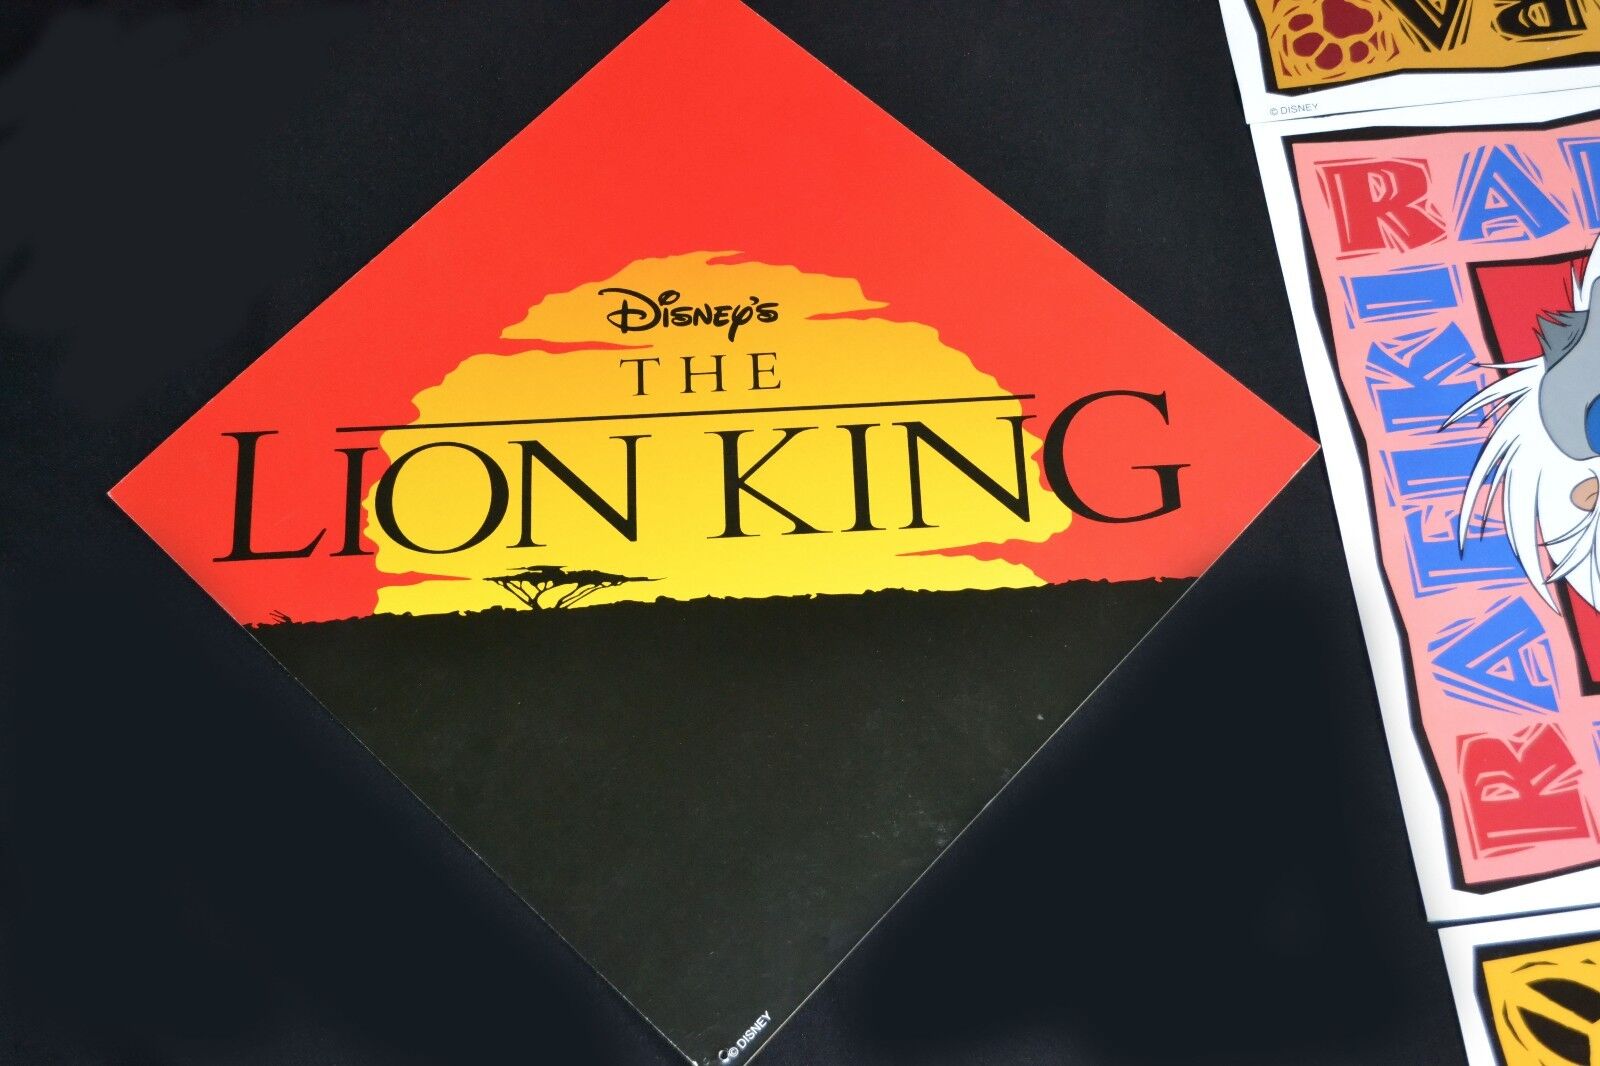 Disney The Lion King Promotional Cardboard Displays and Posters Vintage Rare Без бренда Does Not Apply - фотография #2